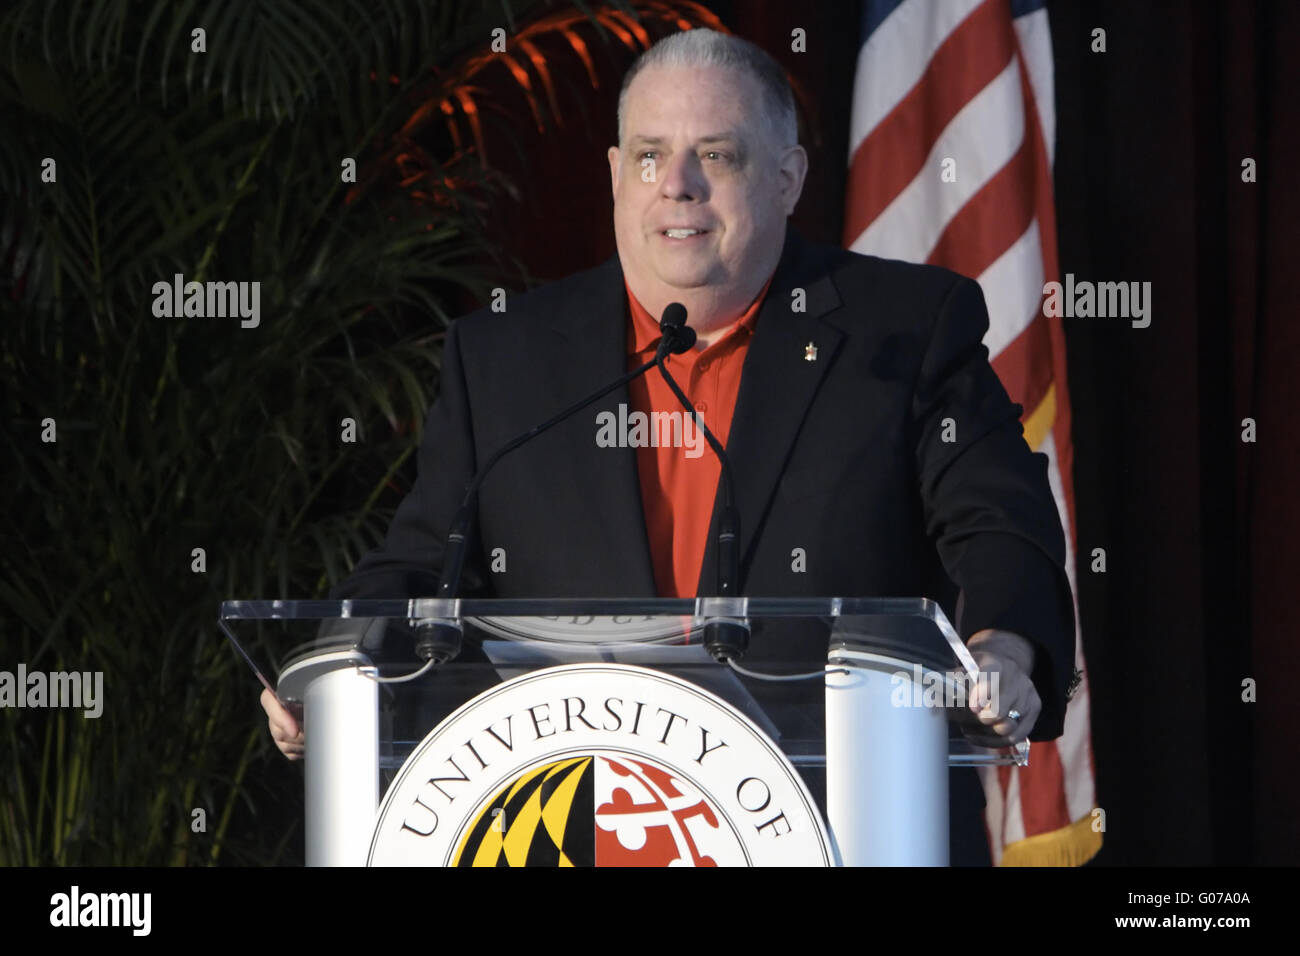 College Park, MARYLAND, USA. 30th Apr, 2016. Maryland Governor Larry Hogan speaking at the Brendan Iribe Center groundbreaking ceremony held in Lot GG1, future site of the building, at the University of Maryland in College Park, MD. © Evan Golub/ZUMA Wire/Alamy Live News Stock Photo